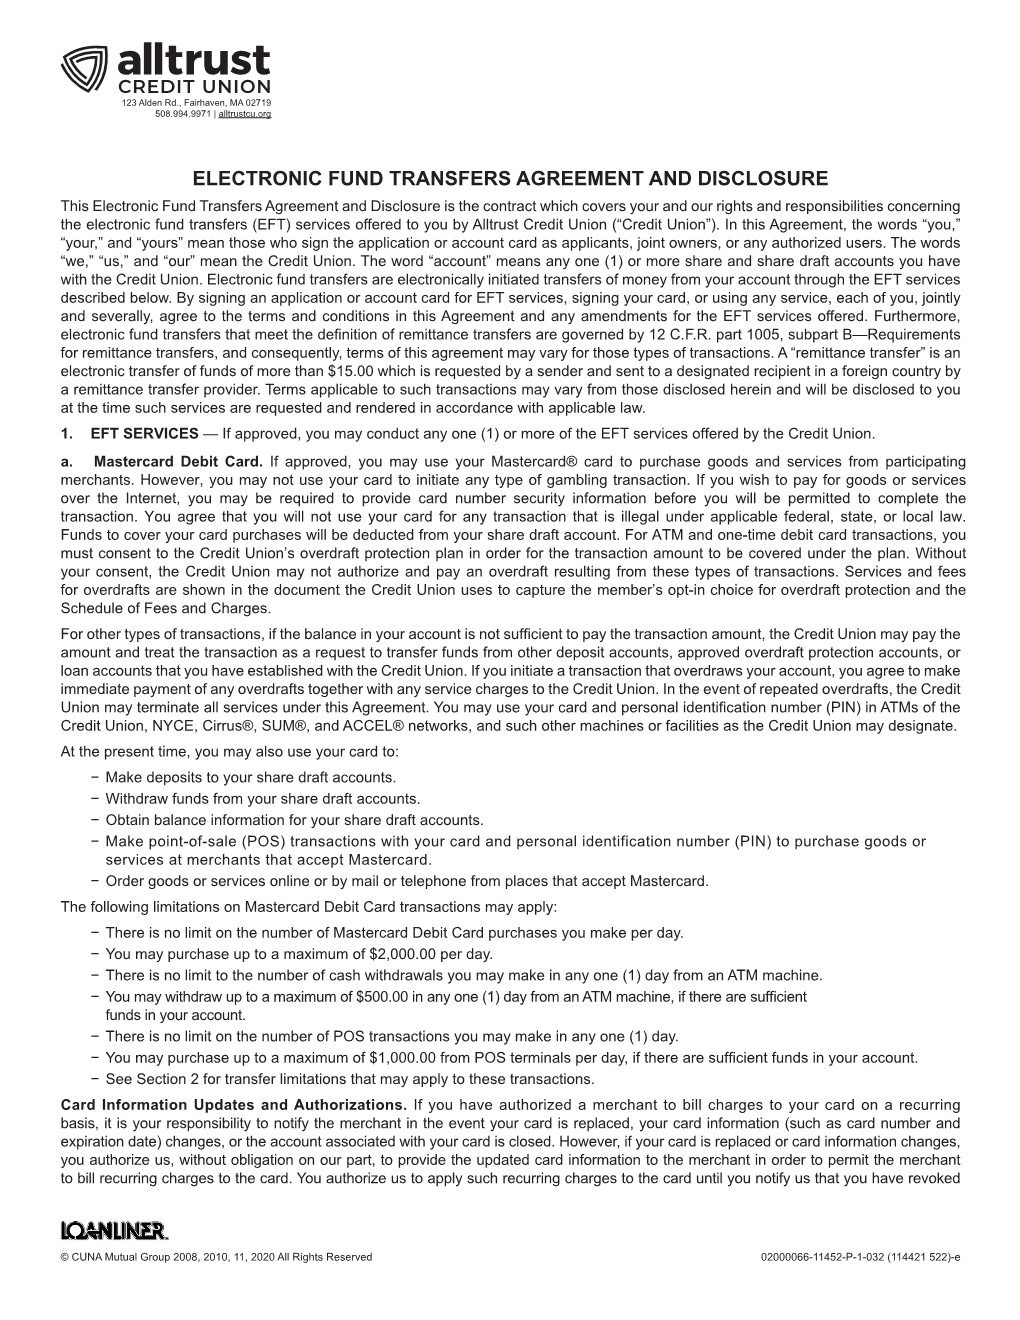 Electronic Fund Transfers Agreement and Disclosure